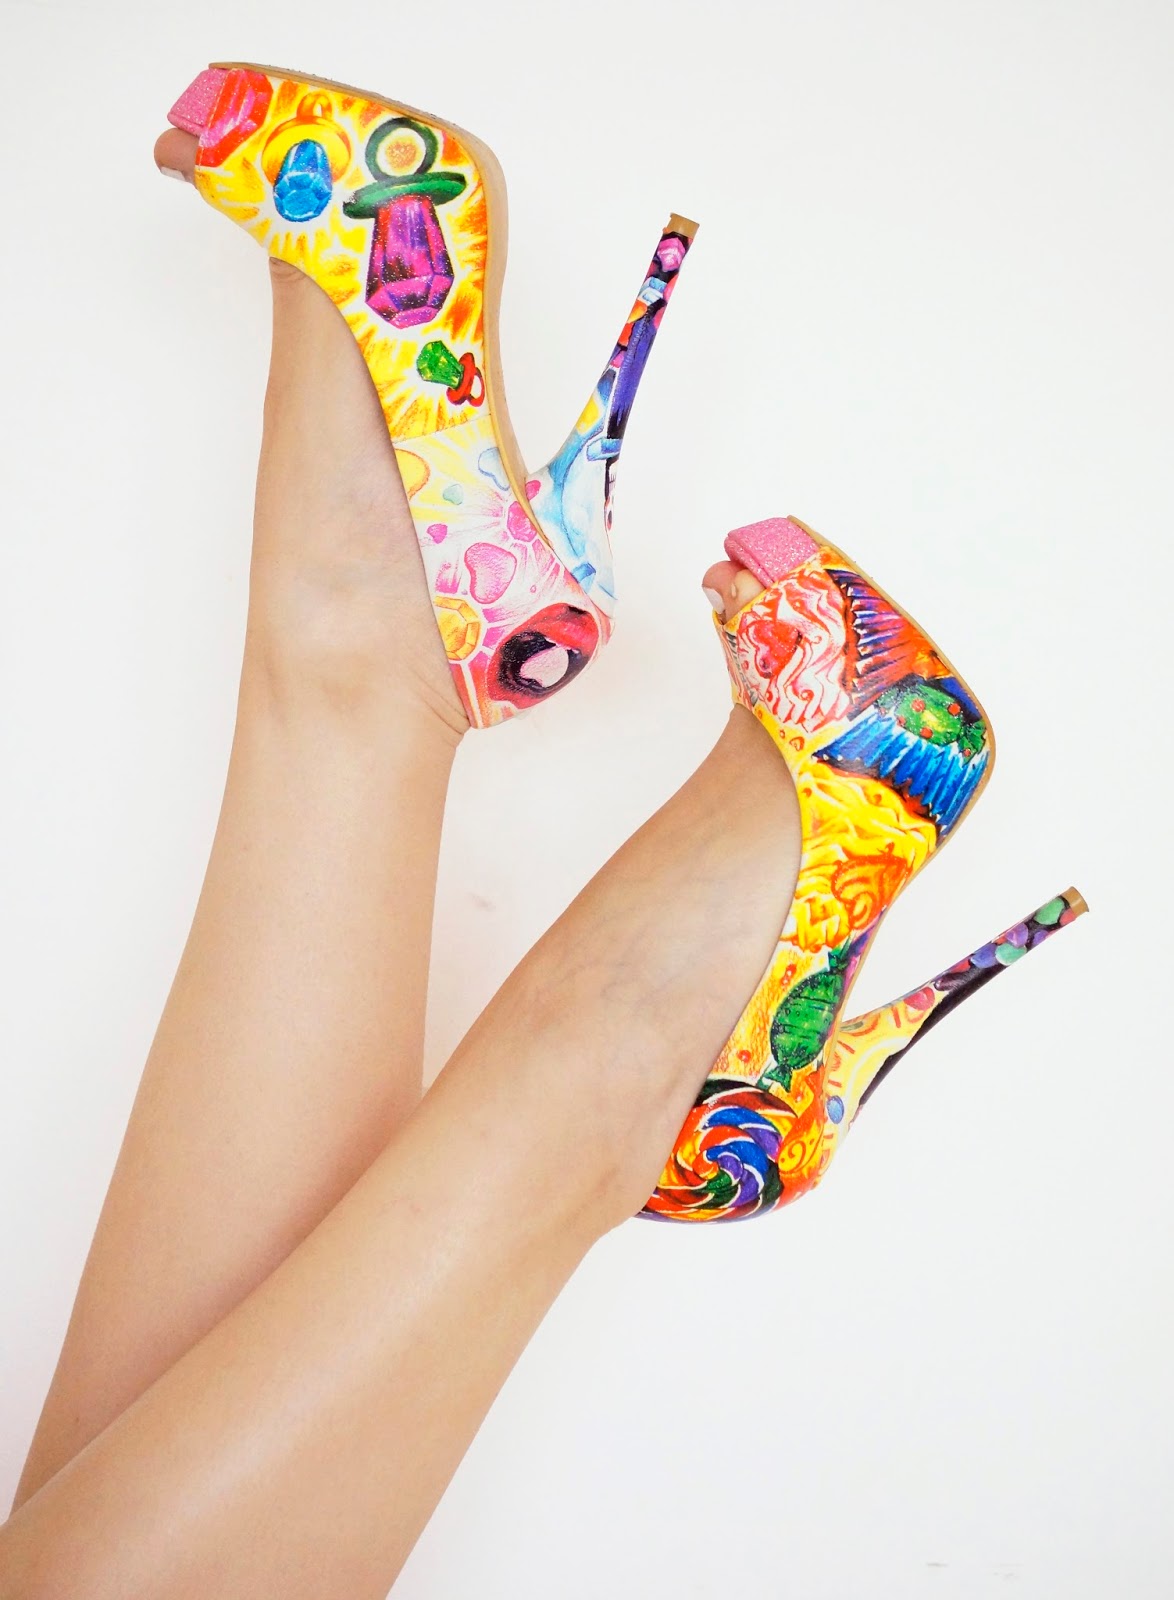 These candyland shoes are all kinds of awesome!!